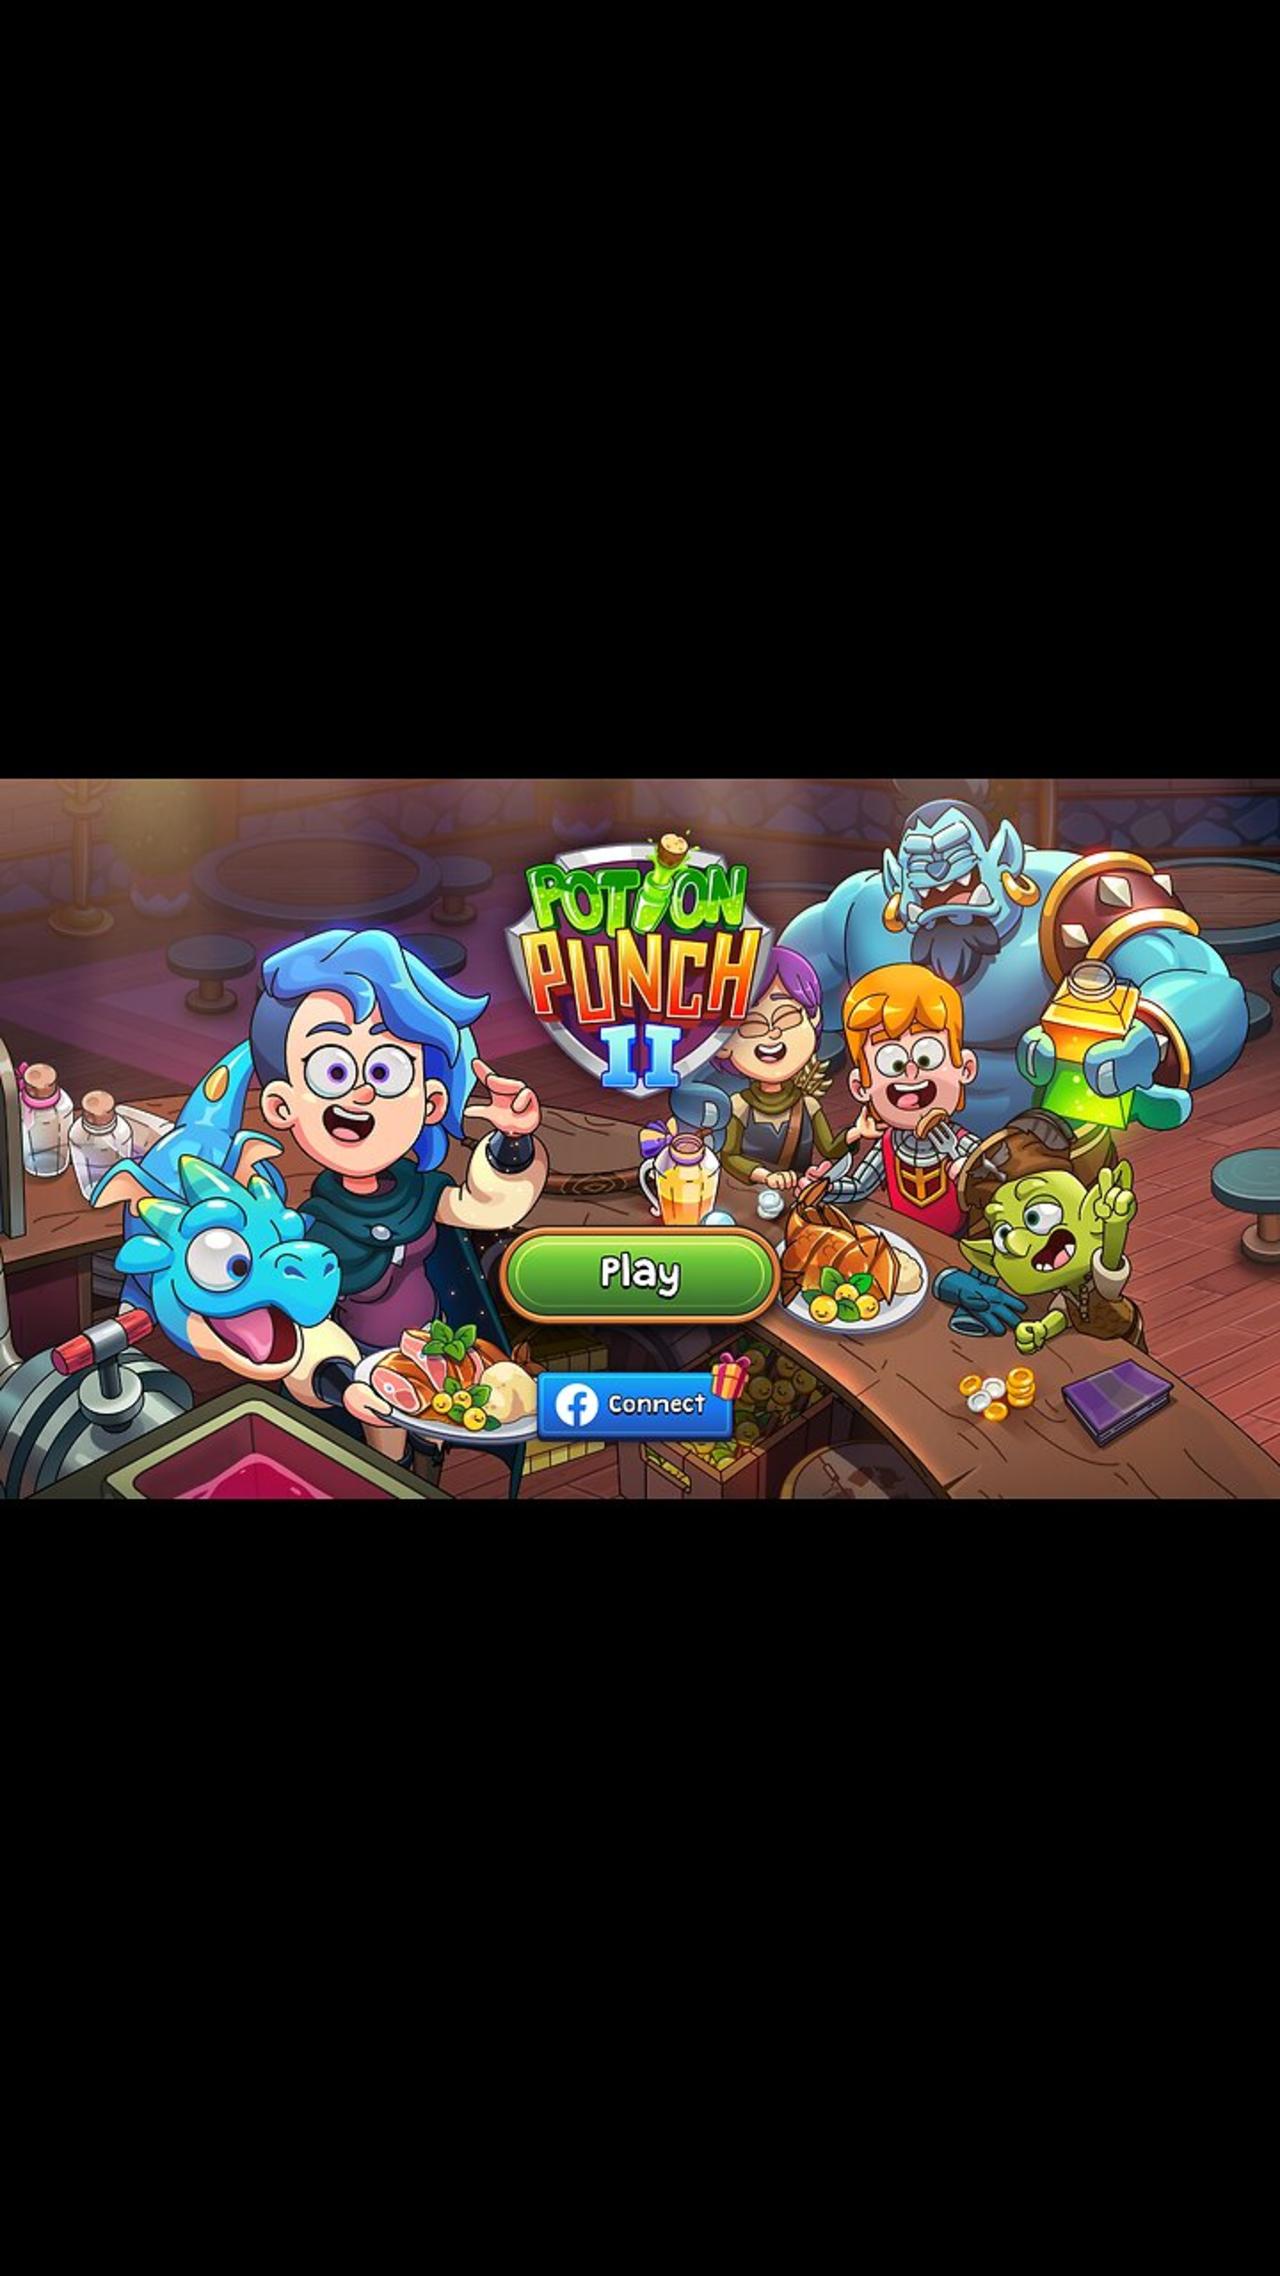 Potion Punch 2 Mobile Gameplay